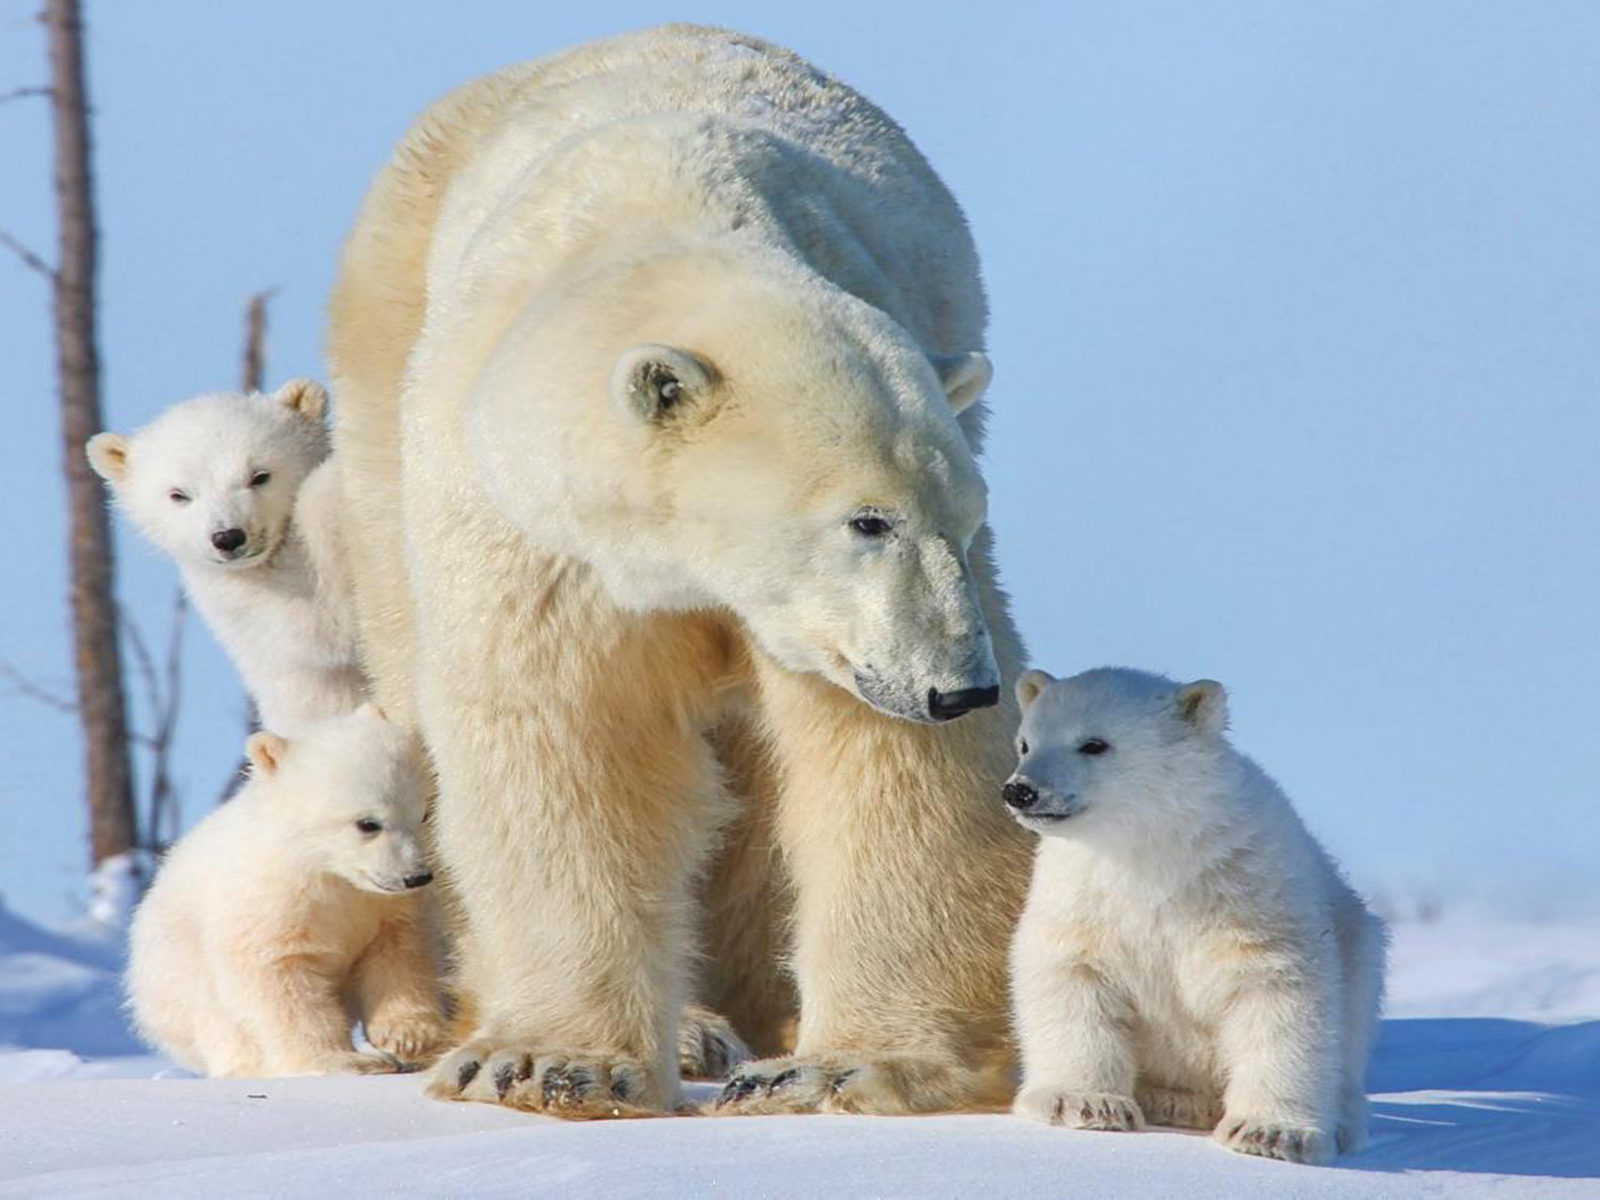 You are currently viewing iPhone Black and White Polar bear family three small cubs desktop wallpaper hd : wallpapers13.com